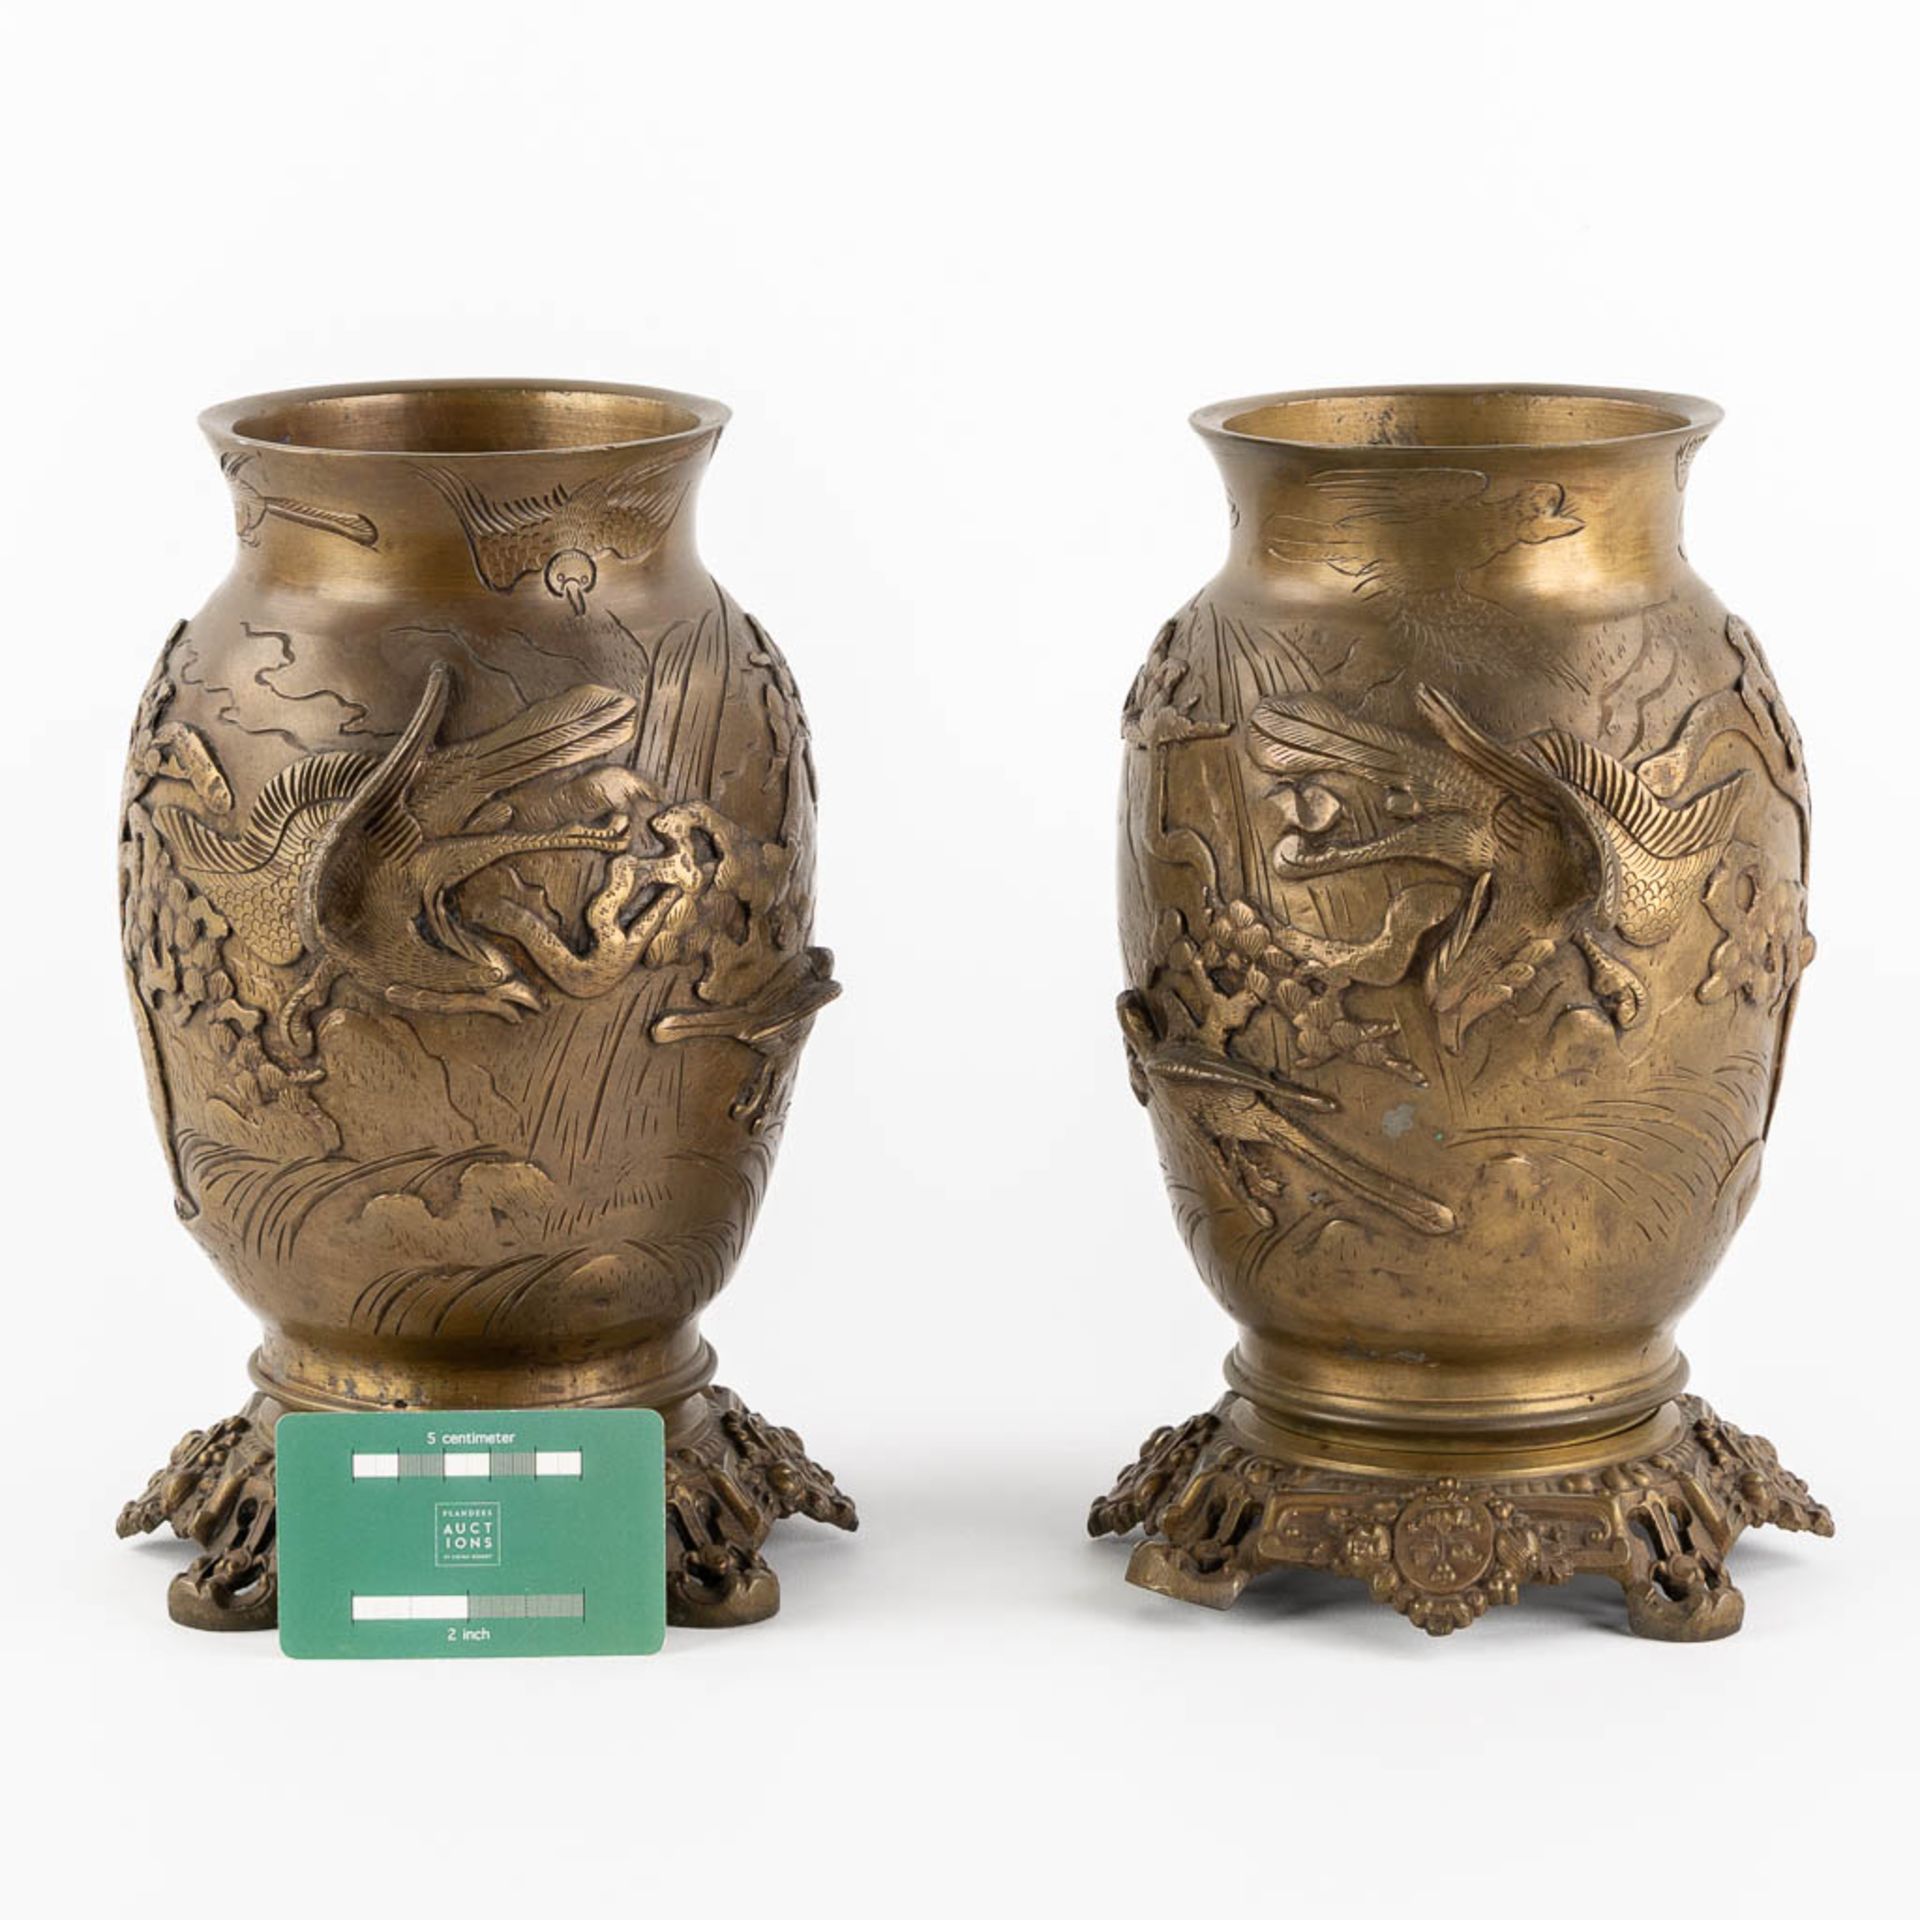 A pair of Oriental vases, depicting flying birds and trees. Patinated bronze. (H:27 x D:16 cm) - Bild 2 aus 16